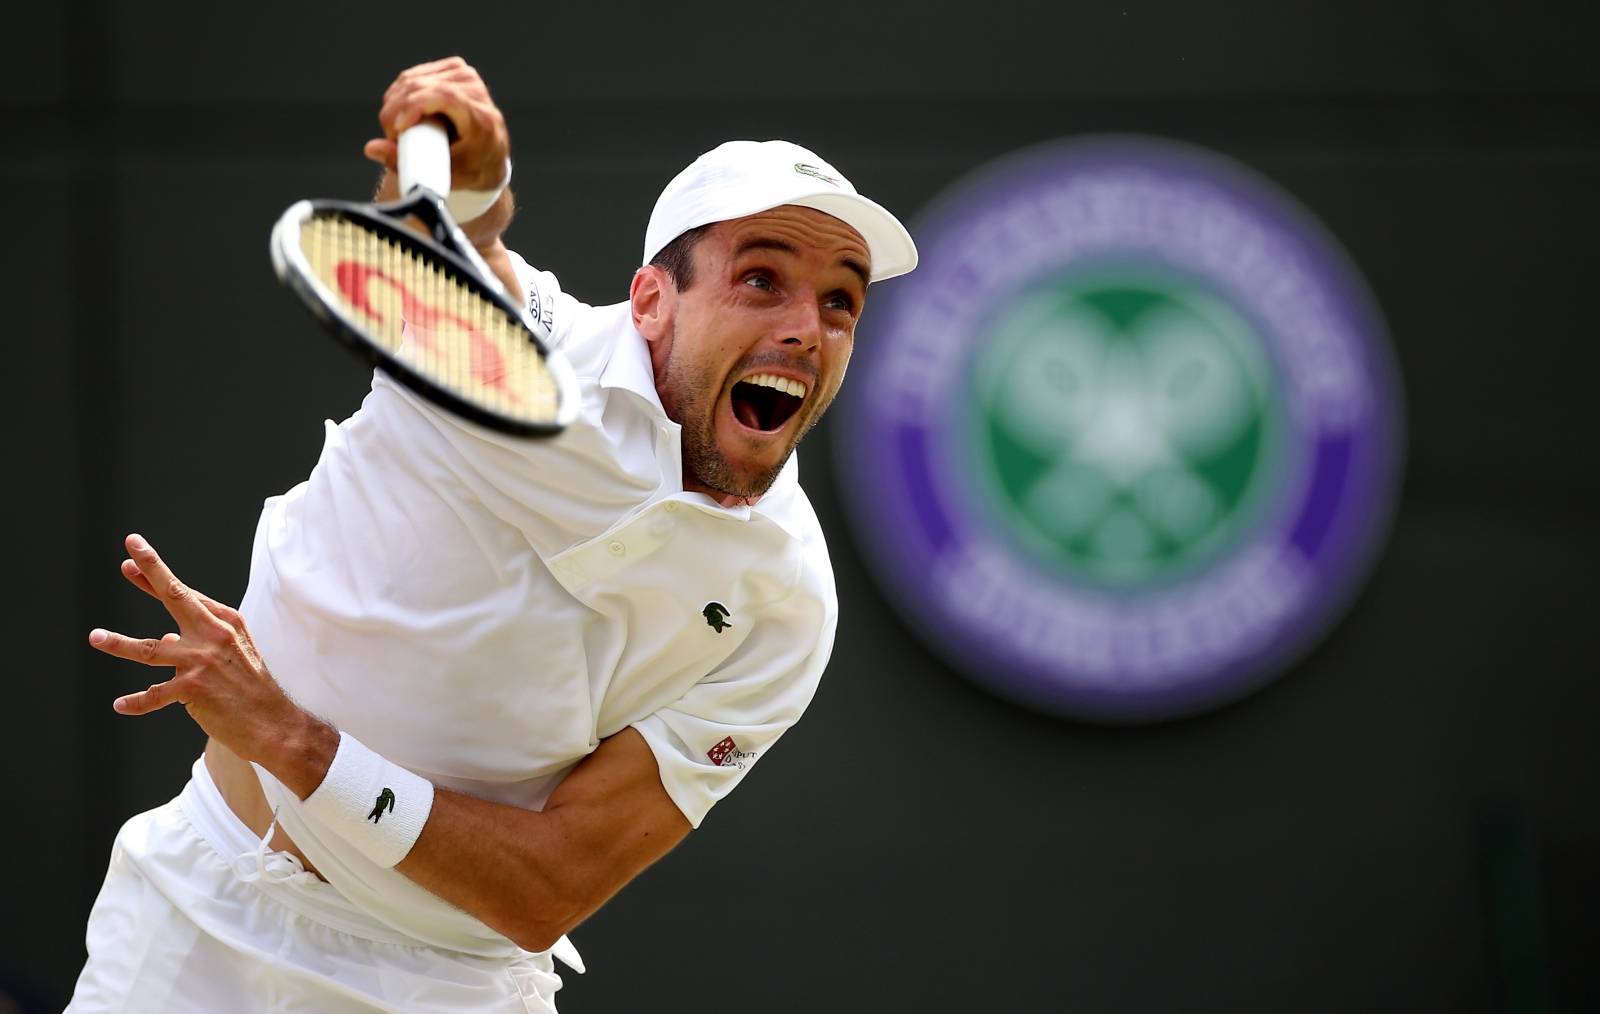 Wimbledon 2019 - Day Nine - The All England Lawn Tennis and Croquet Club